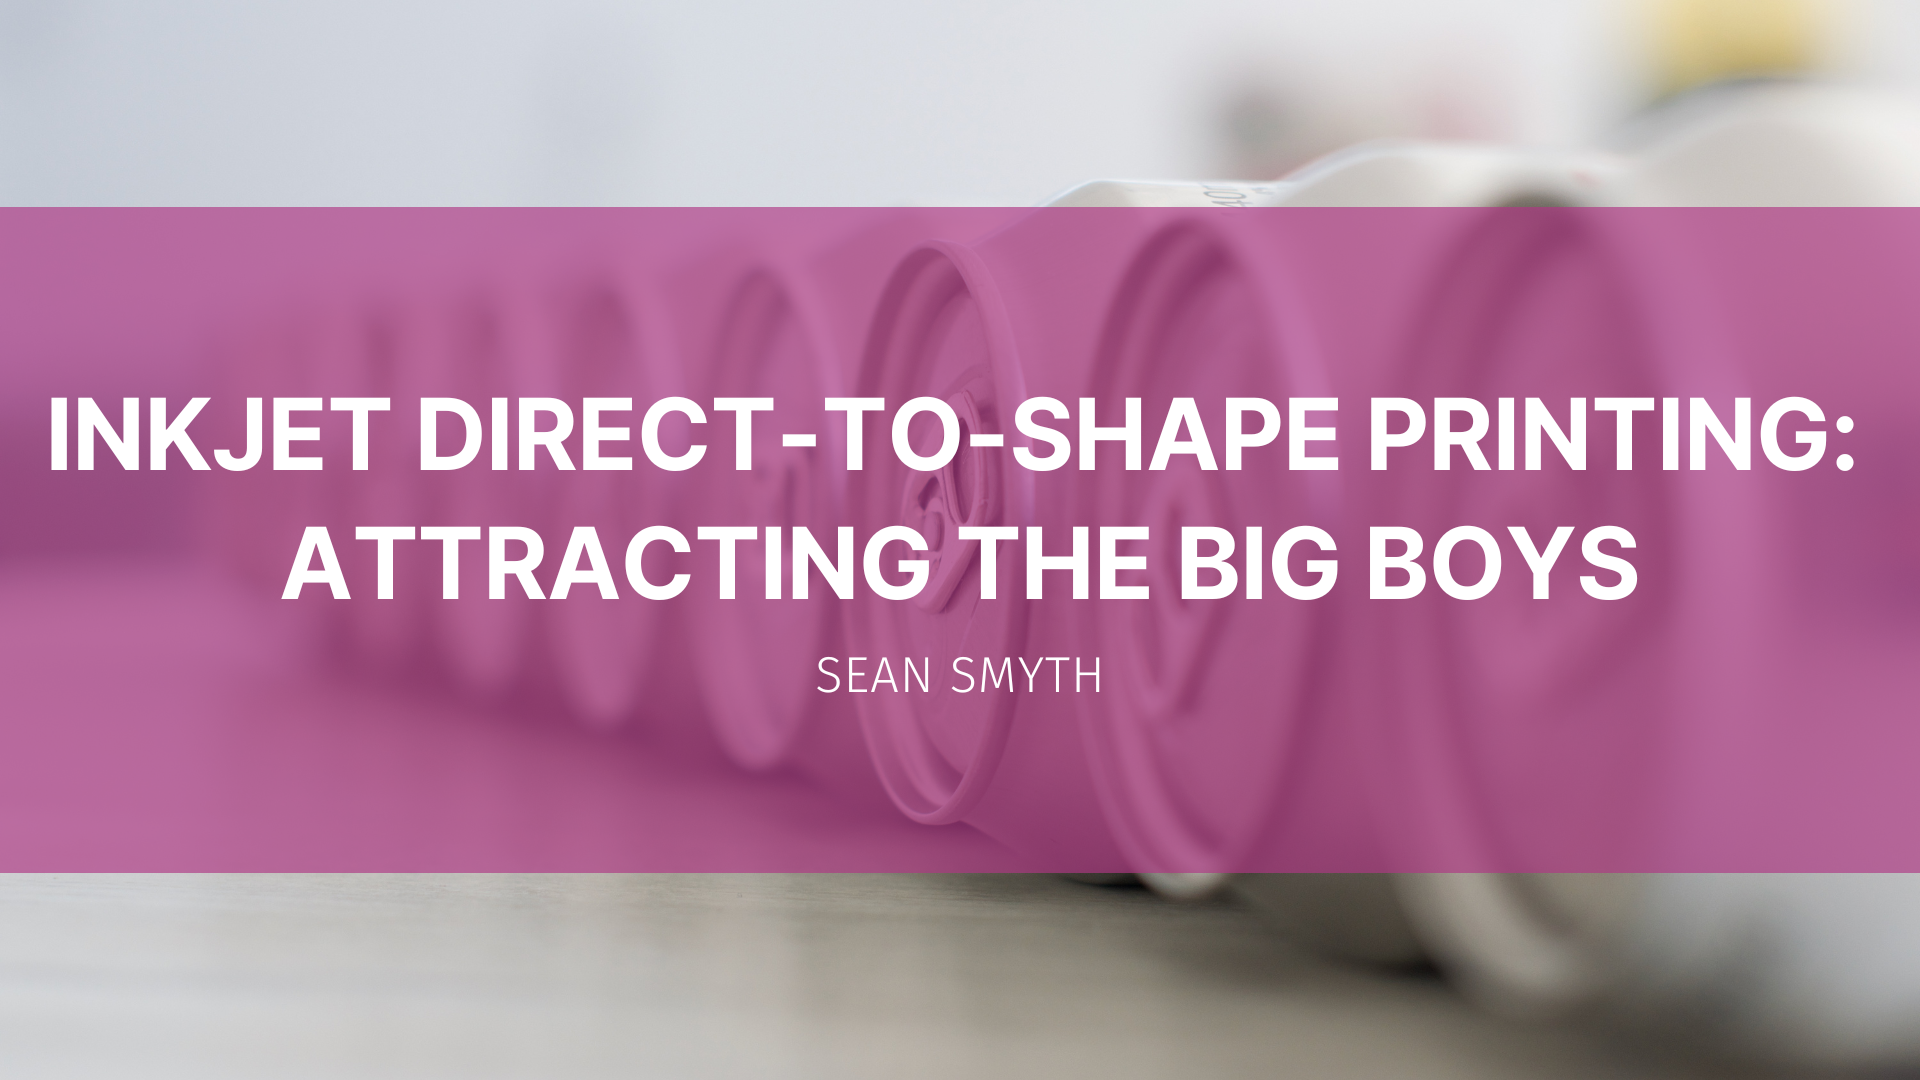 Featured image for “Inkjet direct-to-shape printing – attracting the big boys”